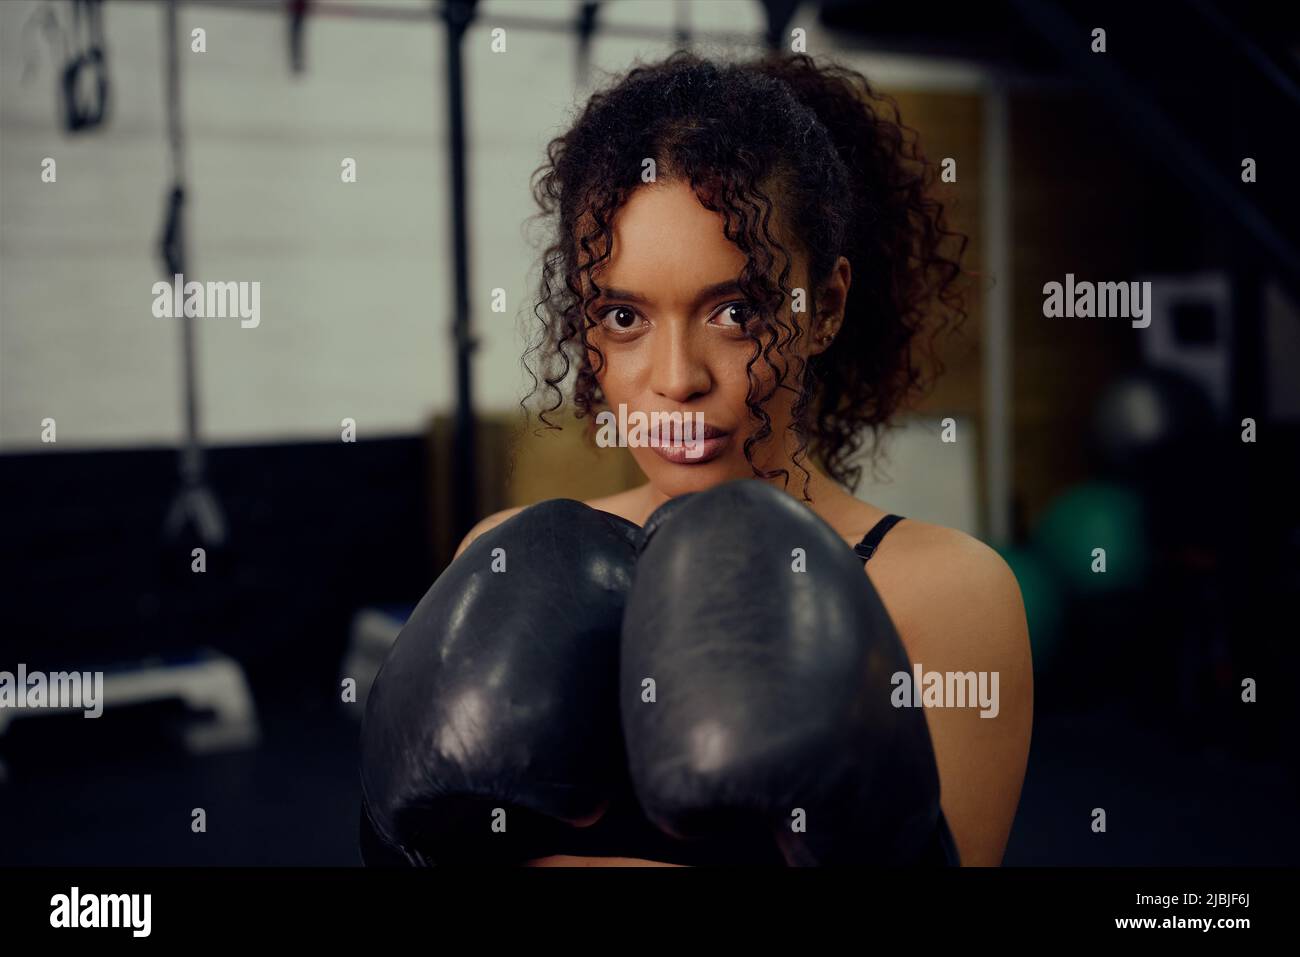 African American female boxer training at the gym with boxing gloves on. Mixed race female holding boxing gloves in air. High quality photo Stock Photo